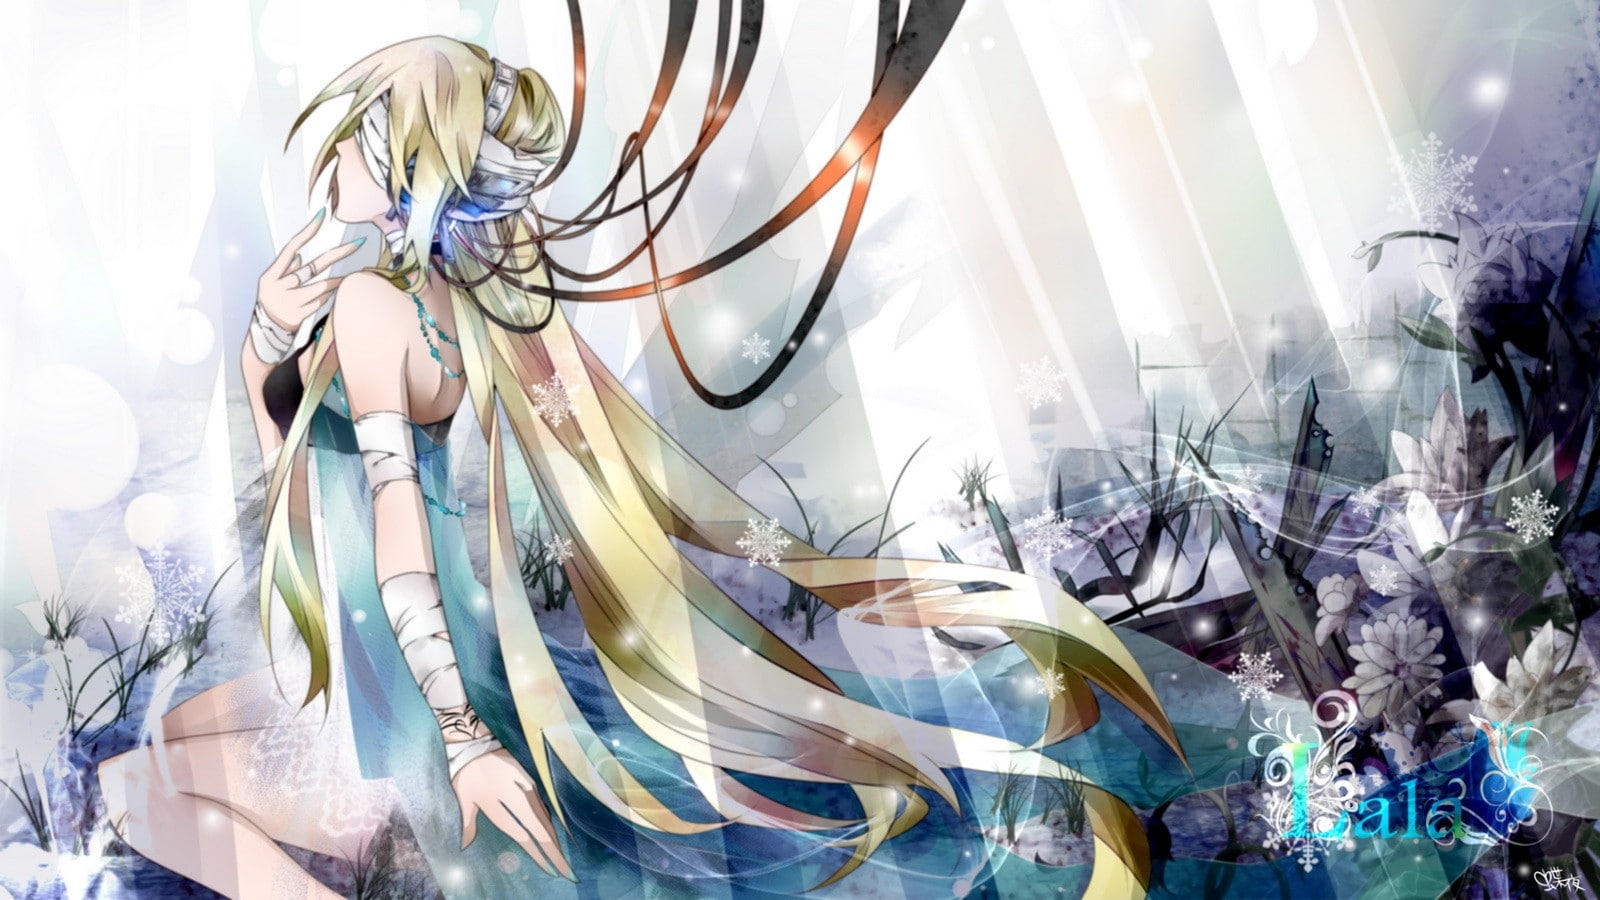 Vocaloid Lily Background - 1600x900 Wallpaper - teahub.io